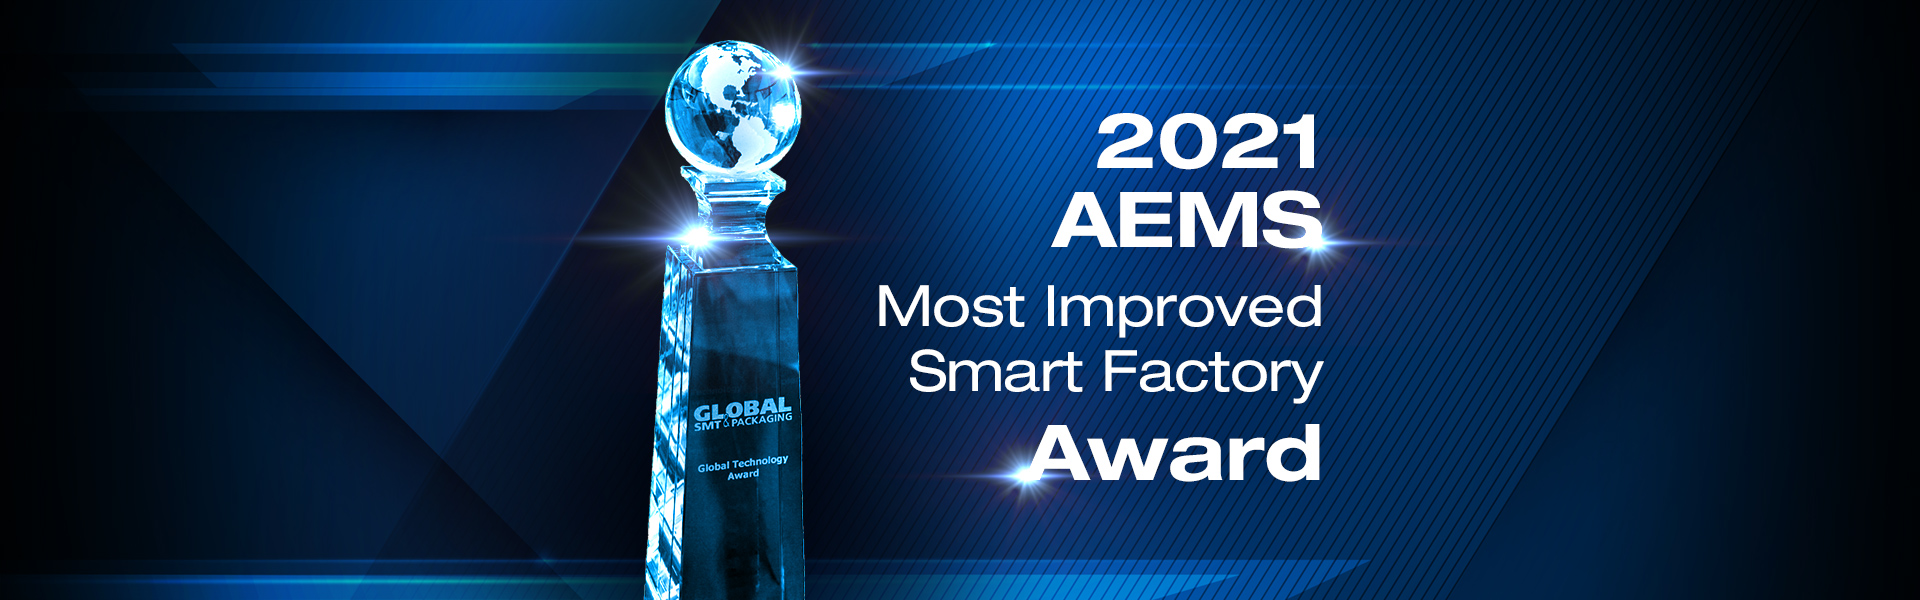 2021 Most Improved Smart Factory Award